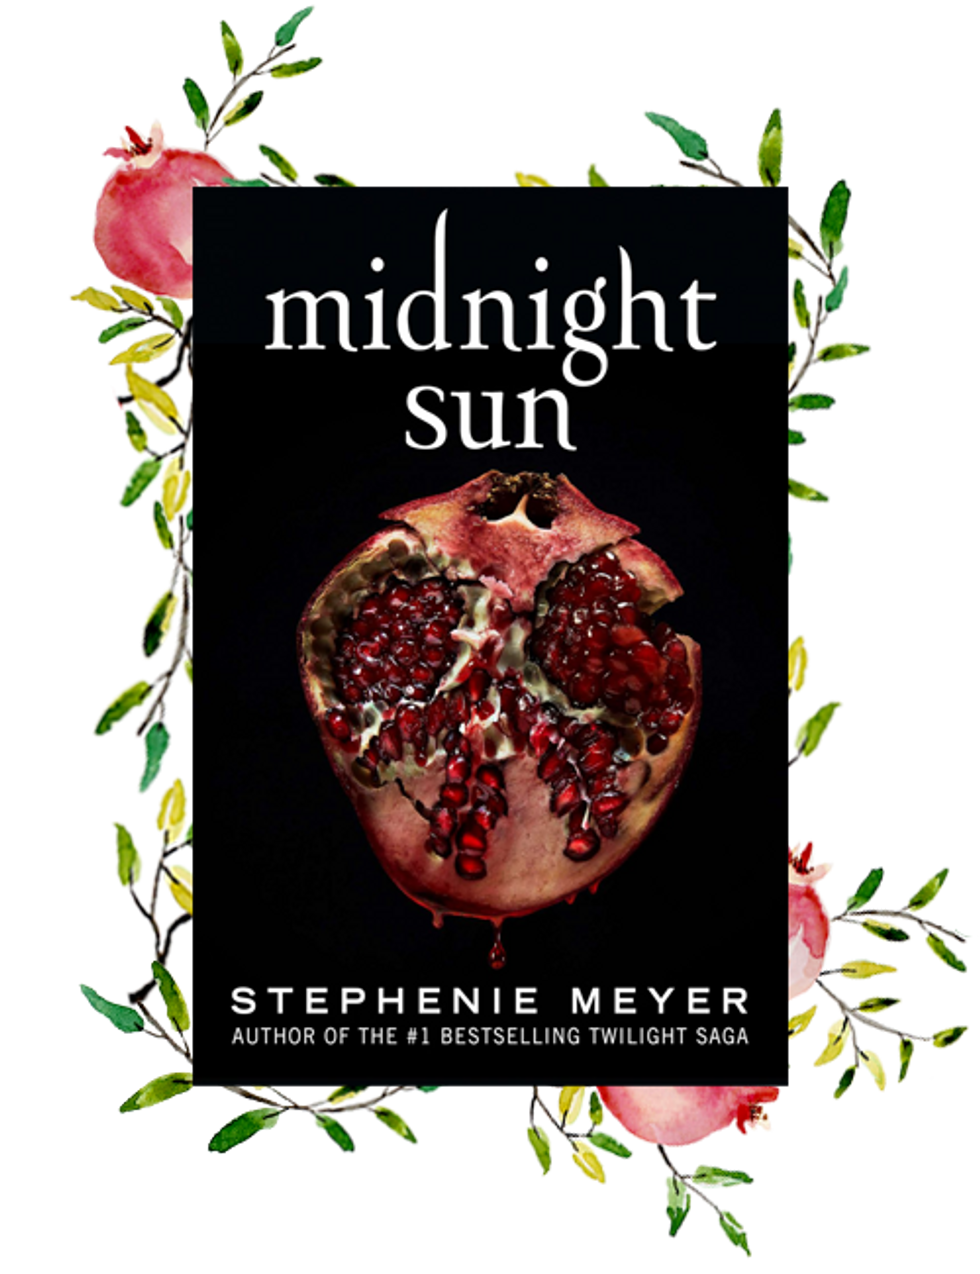 Stephanie Meyer’s ‘Midnight Sun’ Is Releasing August 4th And I’m Panicking